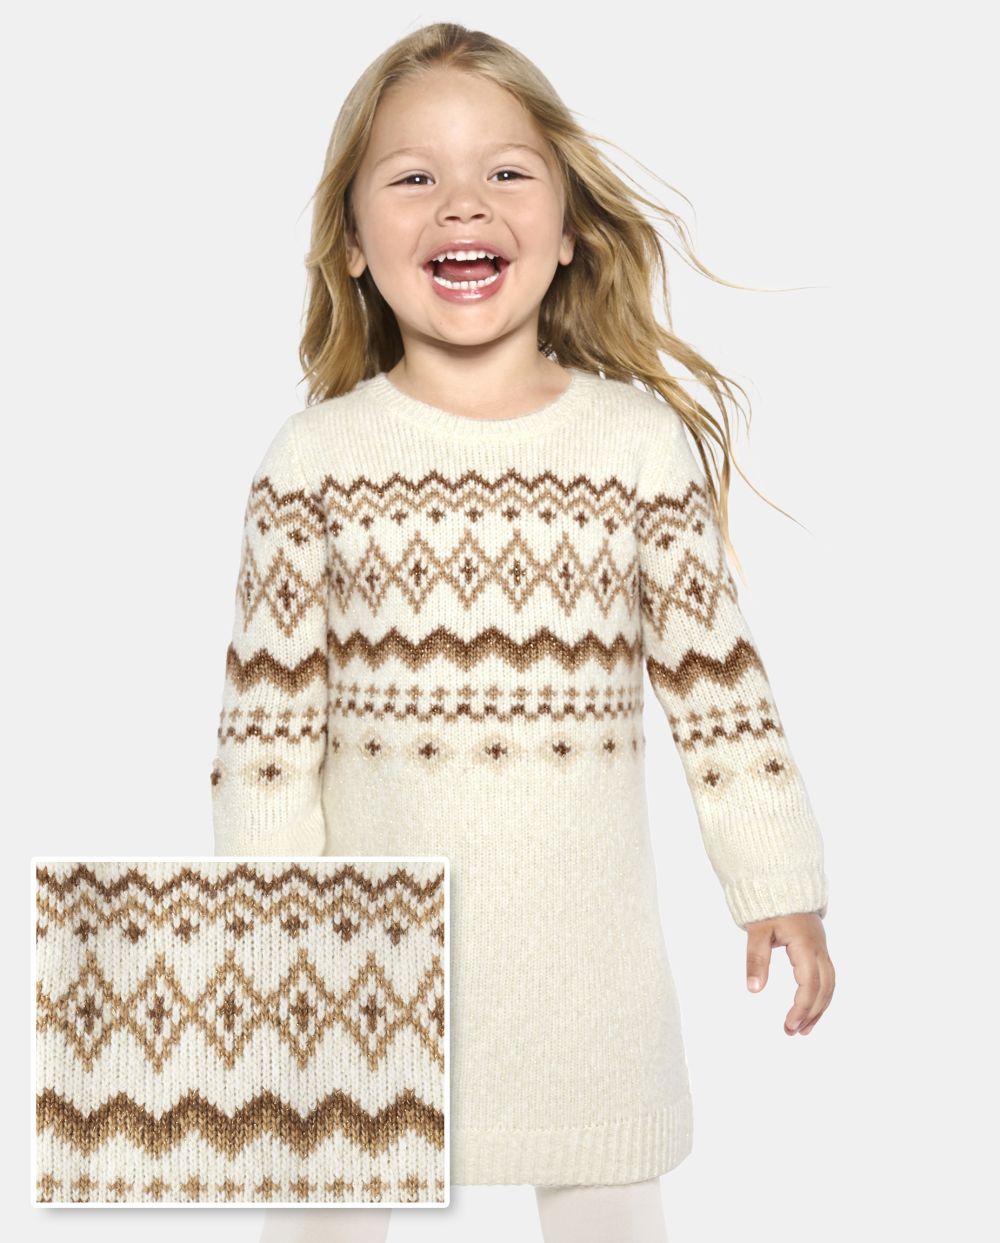 Tall Toddler Baby Long Sleeves Sweater Above the Knee Crew Neck Dress